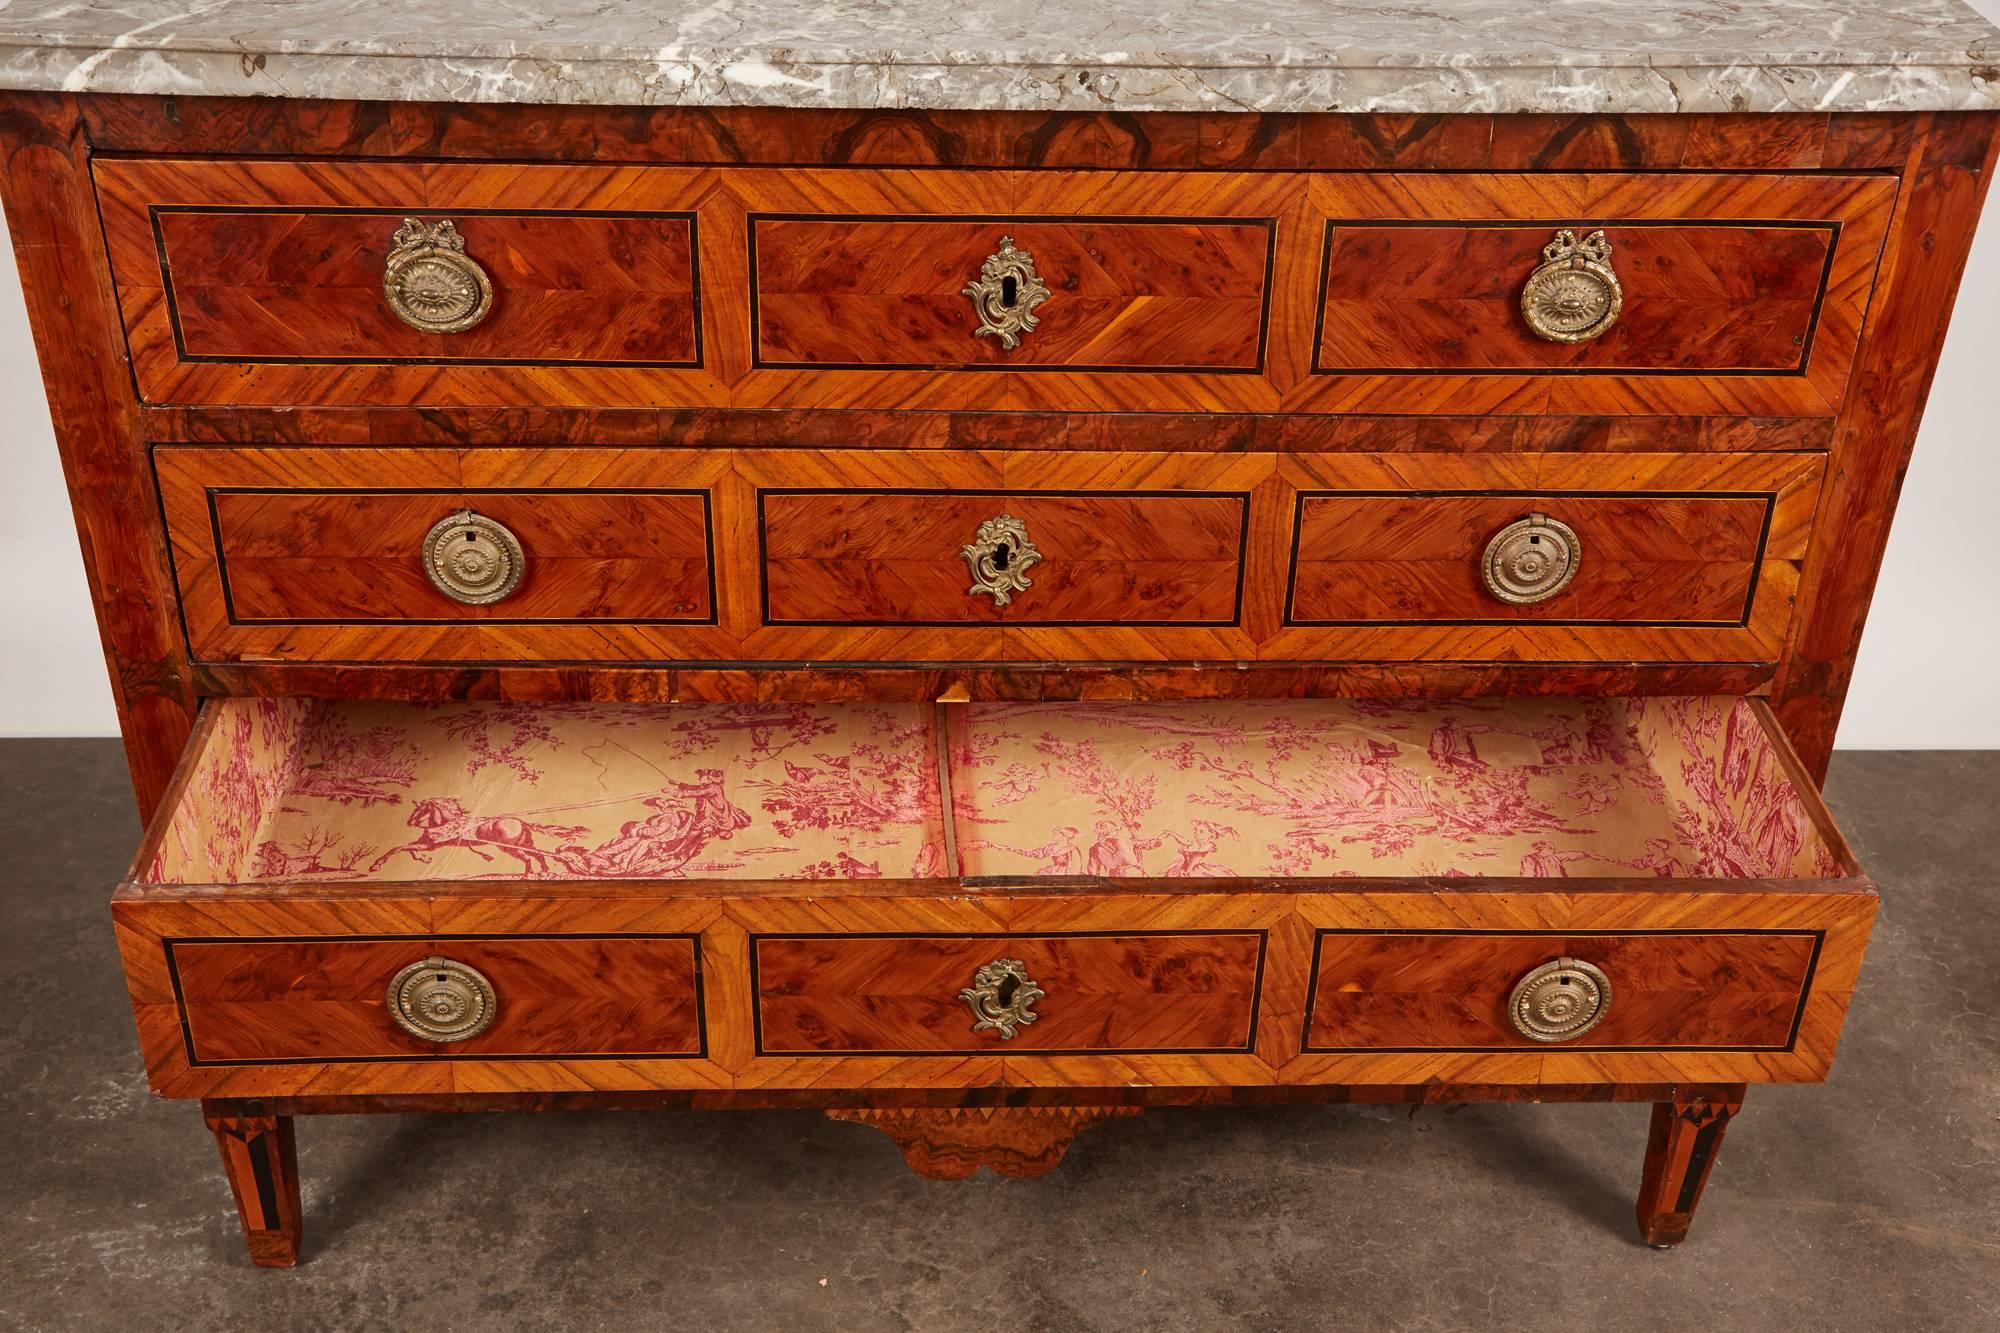 18th Century Italian Neoclassical Inlaid Chest of Drawers with Marble Top For Sale 2